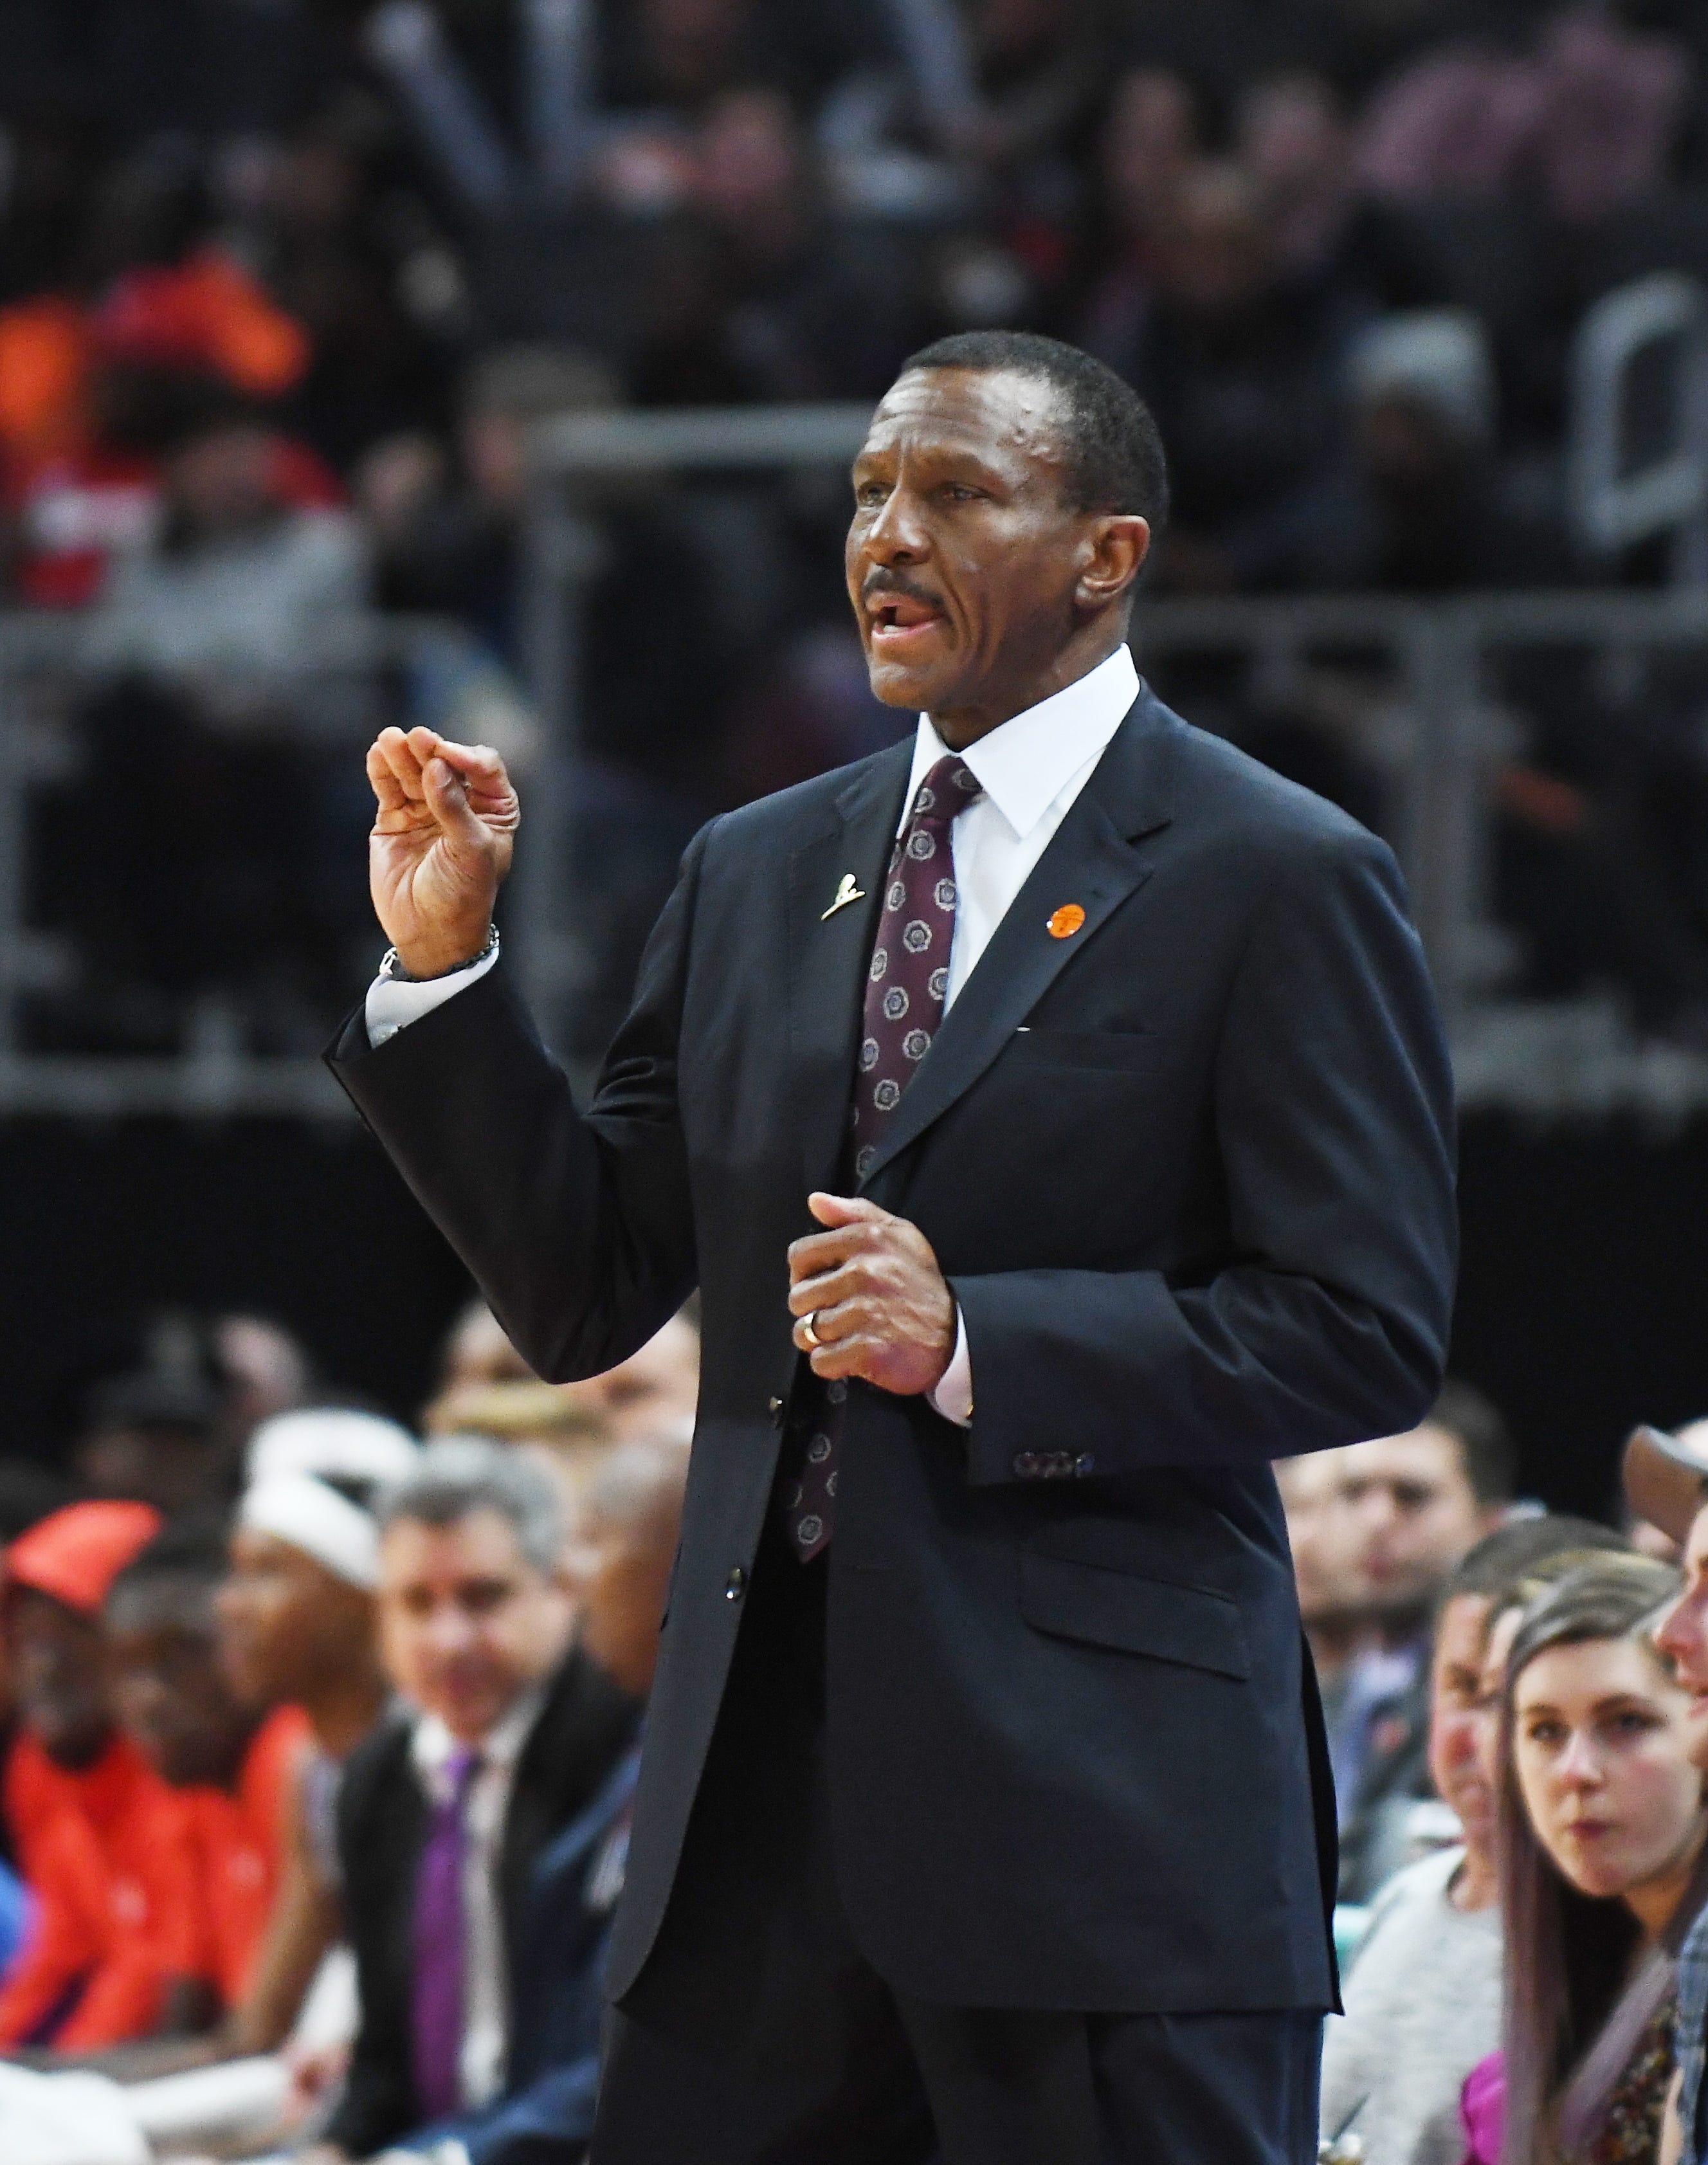 Pistons head coach Dwane Casey calls to the team in the second quarter.